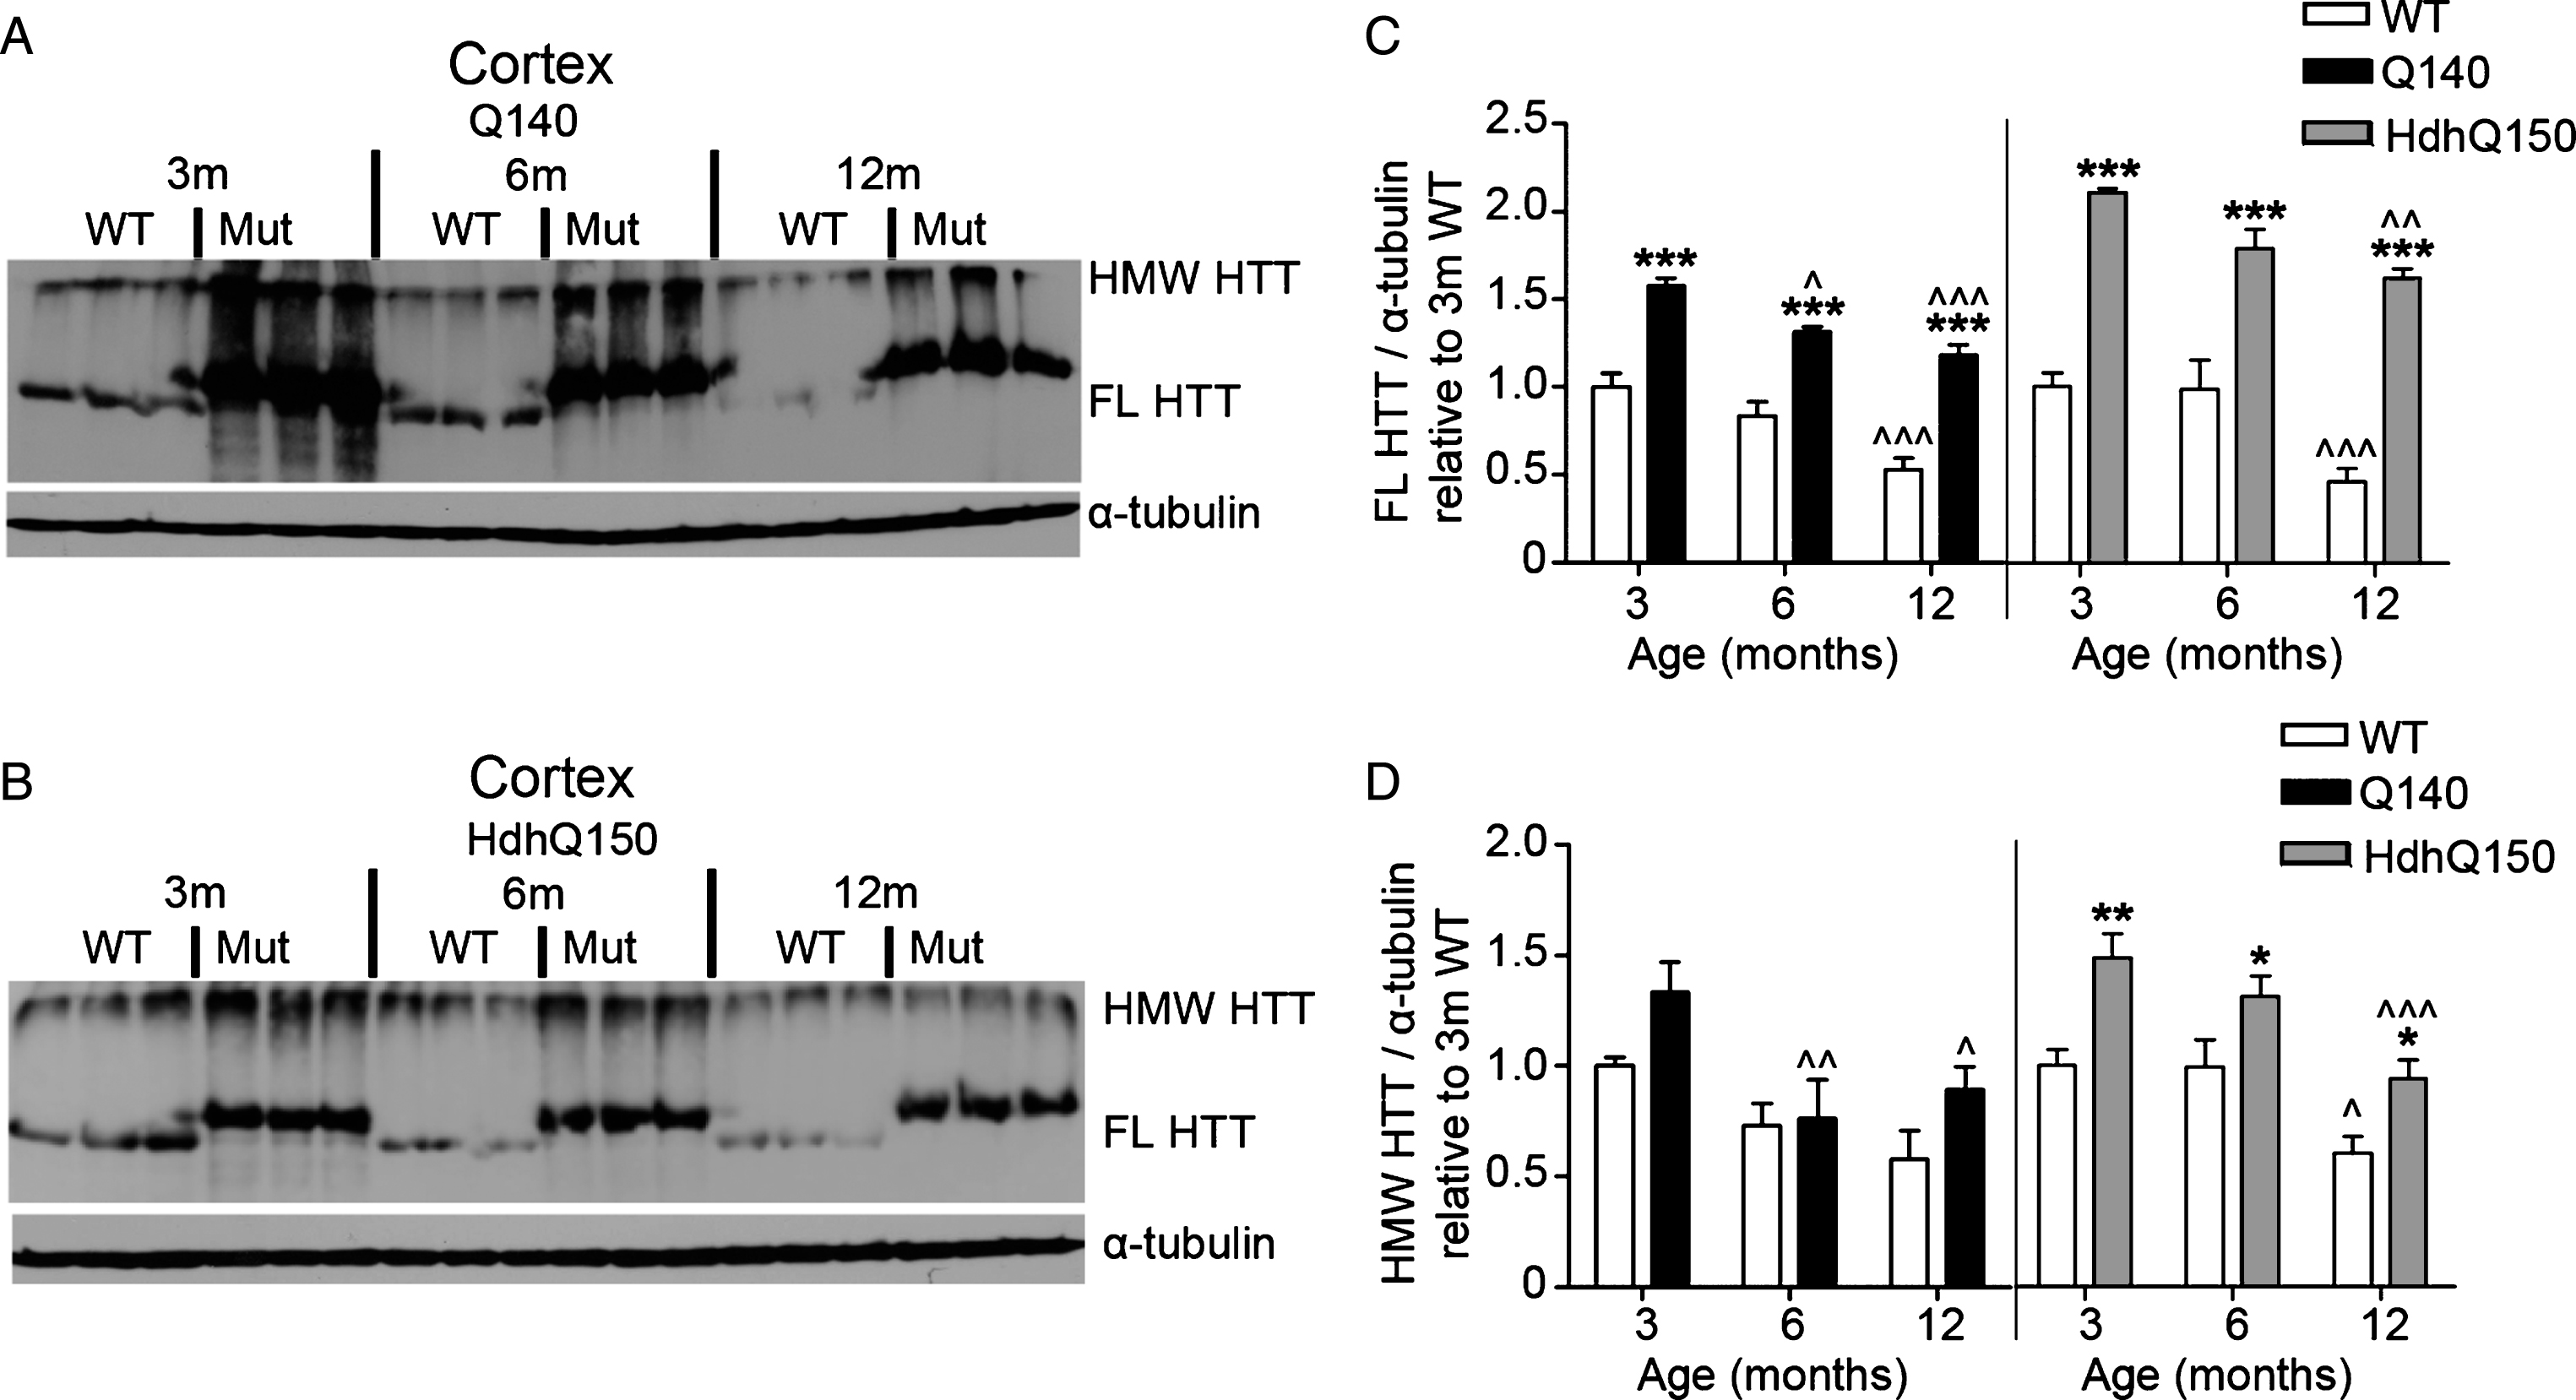 FL and HMW HTT protein levels detected with anti-HTT VB3130 decrease over time in cortex of homozygous Q140 and HdhQ150 mice. Western blots of full-length (FL) HTT (∼350 kDa) and high molecular weight (HMW) HTT (running at the top of the separating gel) species and α-tubulin loading control, at 3, 6 and 12 months of age in knock-in mice and their WT littermates in (A) Q140 cortex, and (B) HdhQ150 cortex. Protein lysate samples were run across two western blots for each knock-in mouse line and data were averaged, n = 3 per group per western blot for a total of n = 6 mice per group. Graphs show mean+SEM (n = 6) HTT/α-tubulin in 3, 6 and 12 months old Q140 and HdhQ150 mice and WT littermates, relative to WT levels at 3 months for (C) cortical FL HTT, and (D) cortical HMW HTT. Two-way ANOVA with Bonferroni post-hoc tests, within each knock-in mouse line: *p < 0.05, **p < 0.01, ***p < 0.001, compared to WT littermates at the same age;  ∧
p < 0.05,  ∧∧
p < 0.01,  ∧∧∧
p < 0.001, compared to 3 month old mice of the same genotype.